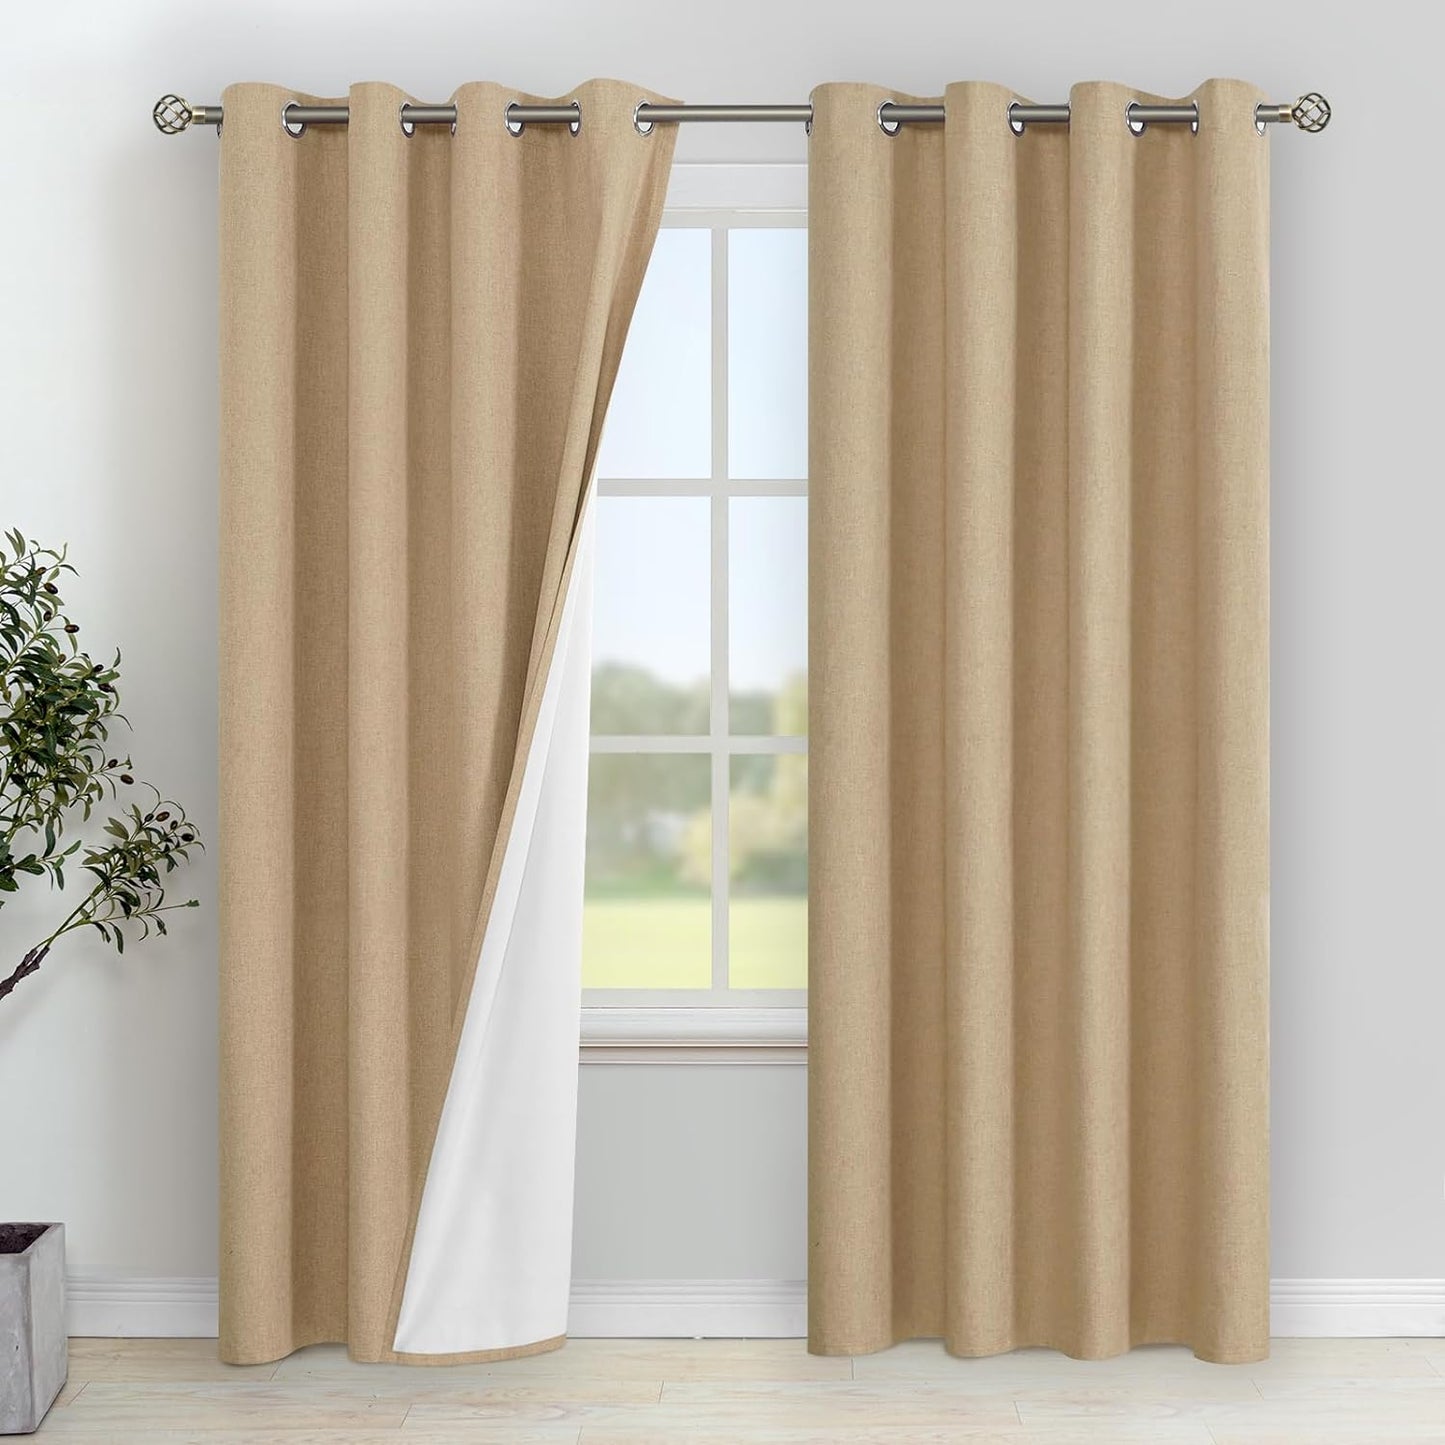 Youngstex Linen Blackout Curtains 63 Inches Long, Grommet Full Room Darkening Linen Window Drapes Thermal Insulated for Living Room Bedroom, 2 Panels, 52 X 63 Inch, Linen  YoungsTex Khaki 52W X 84L 